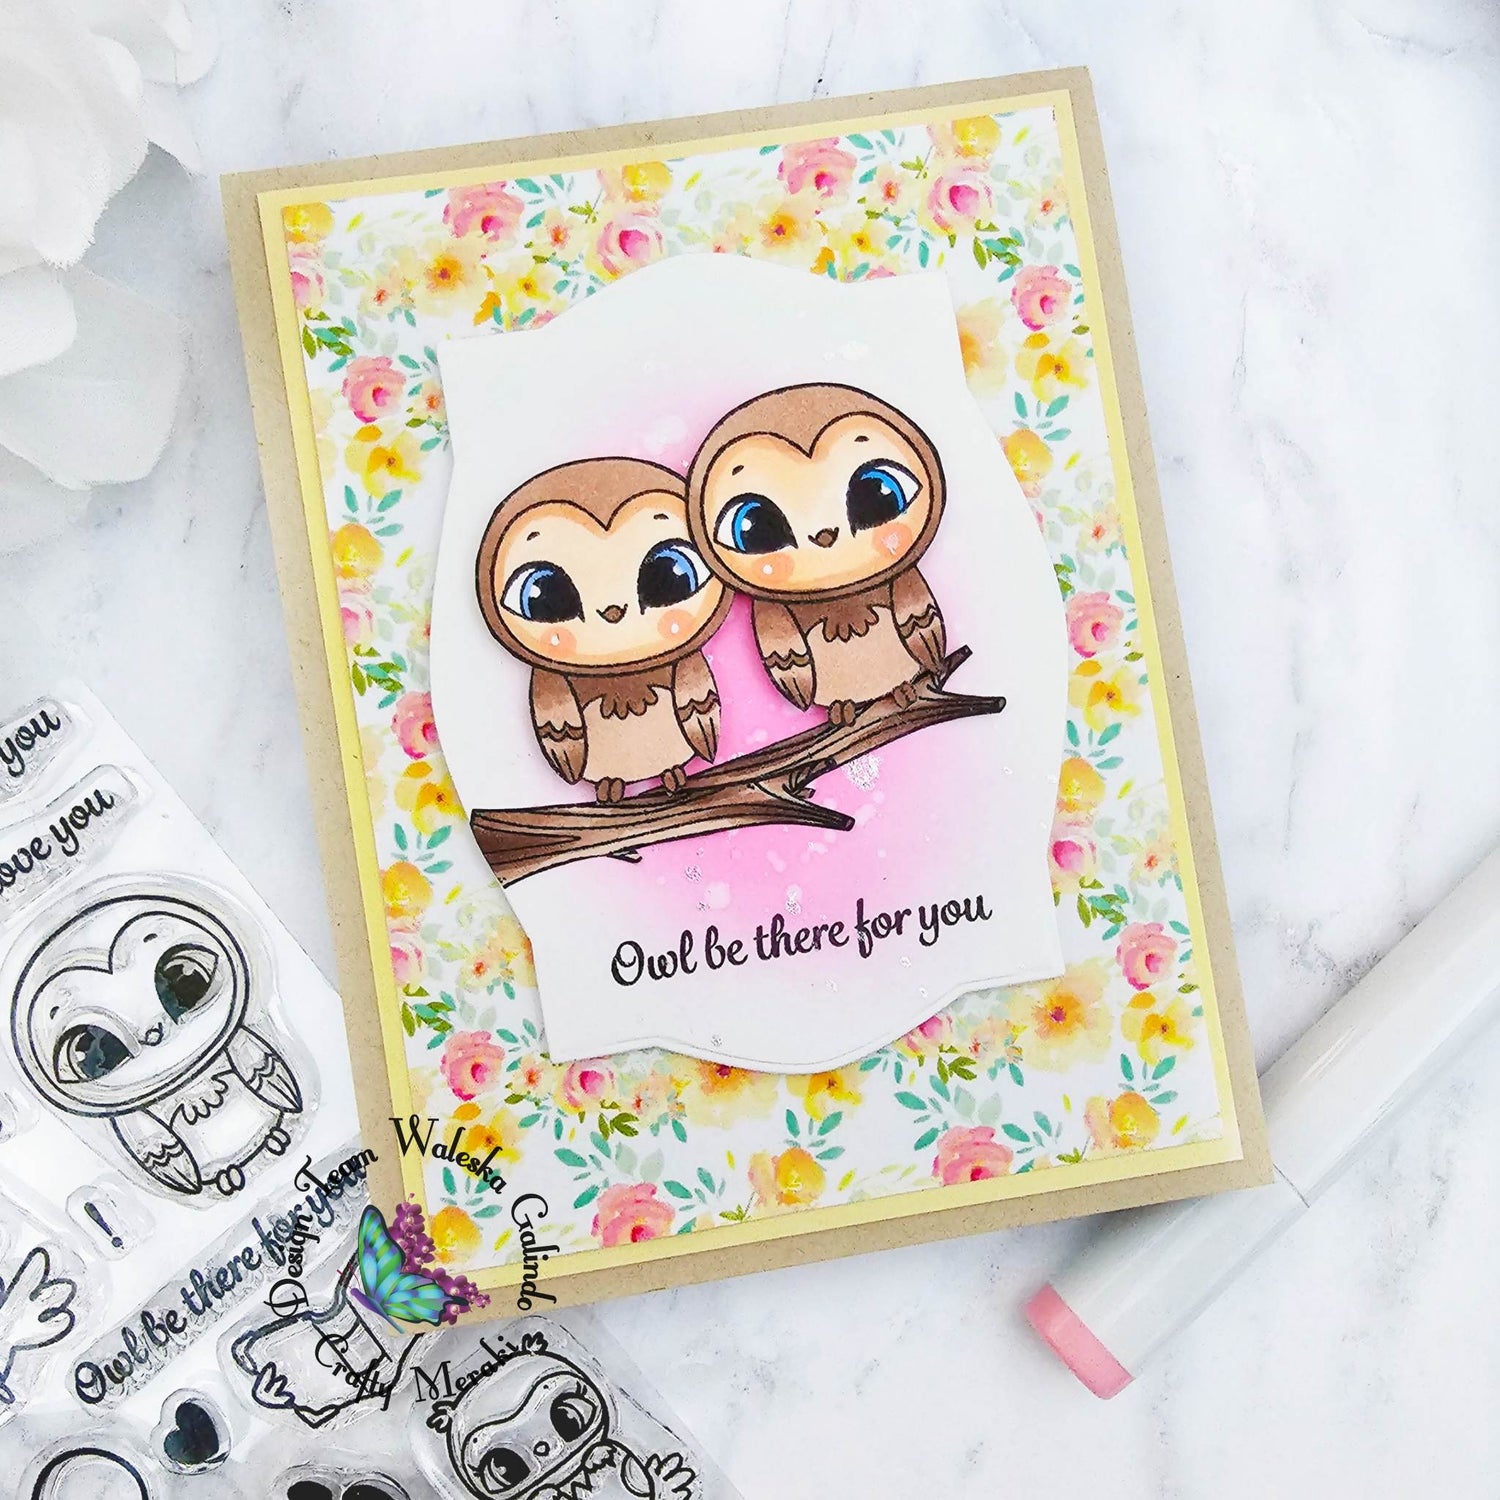 Let's Create an Adorable 'Owl Yours' Card with the For the Love of Flowers Paper Collection